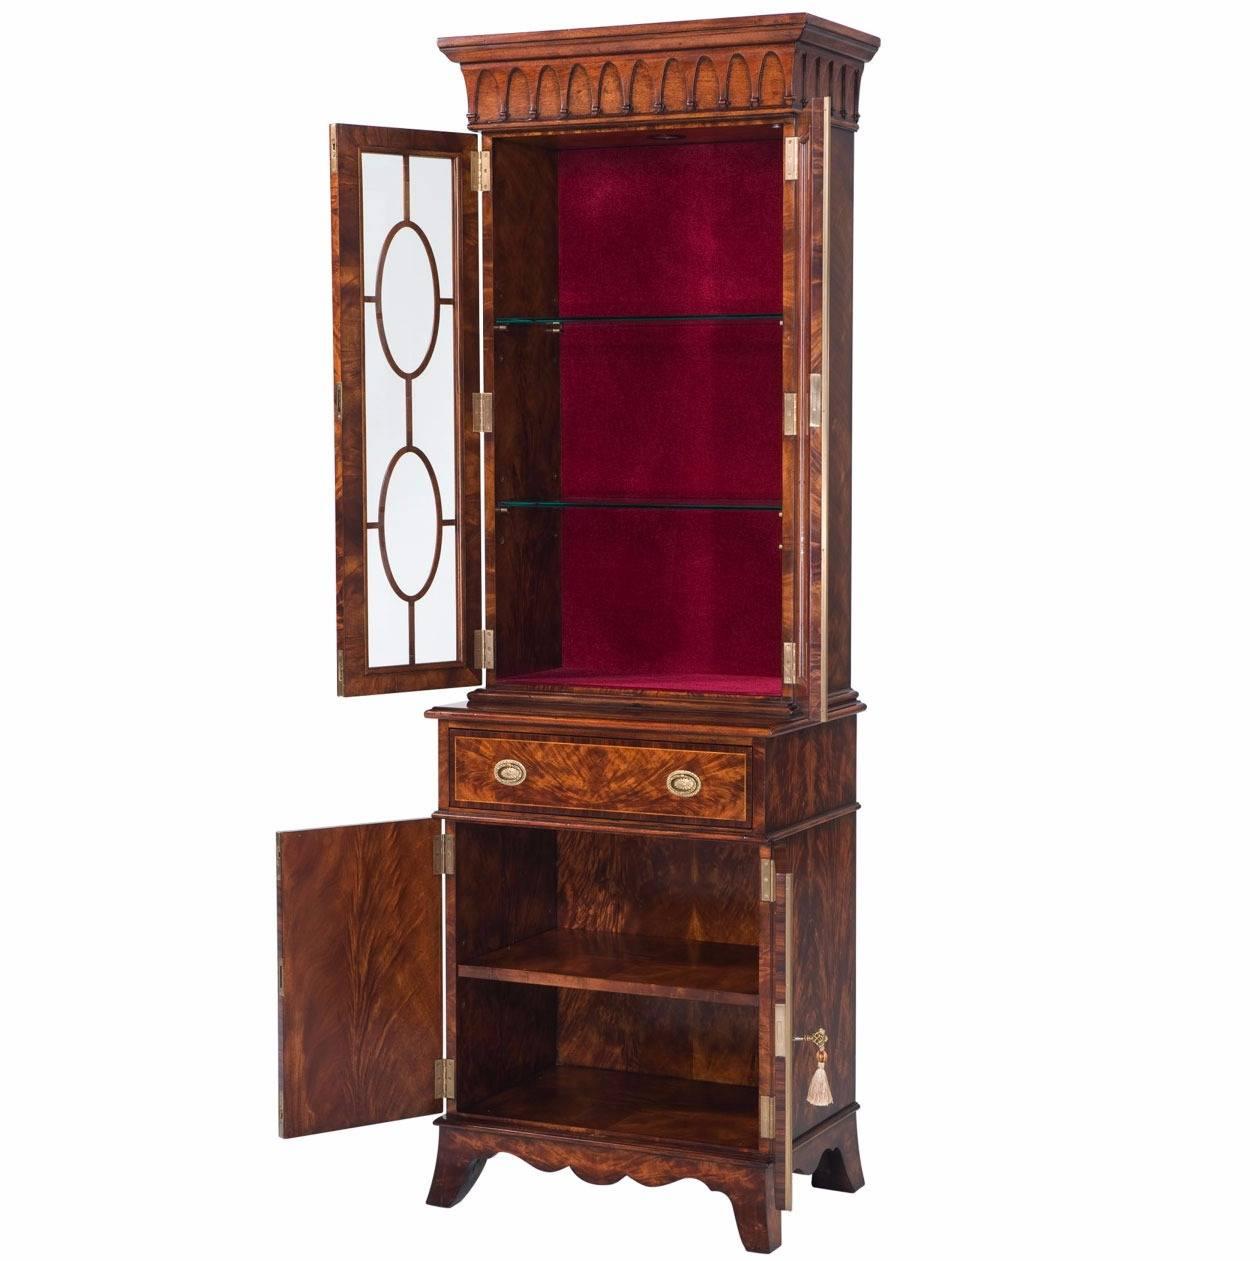 A narrow George III Sheraton style mahogany library bookcase. The upper section has a moulded cornice above an icicle frieze over two glazed doors with oval astragals enclosing a velvet lined interior with glass shelves and touch lights. The cabinet